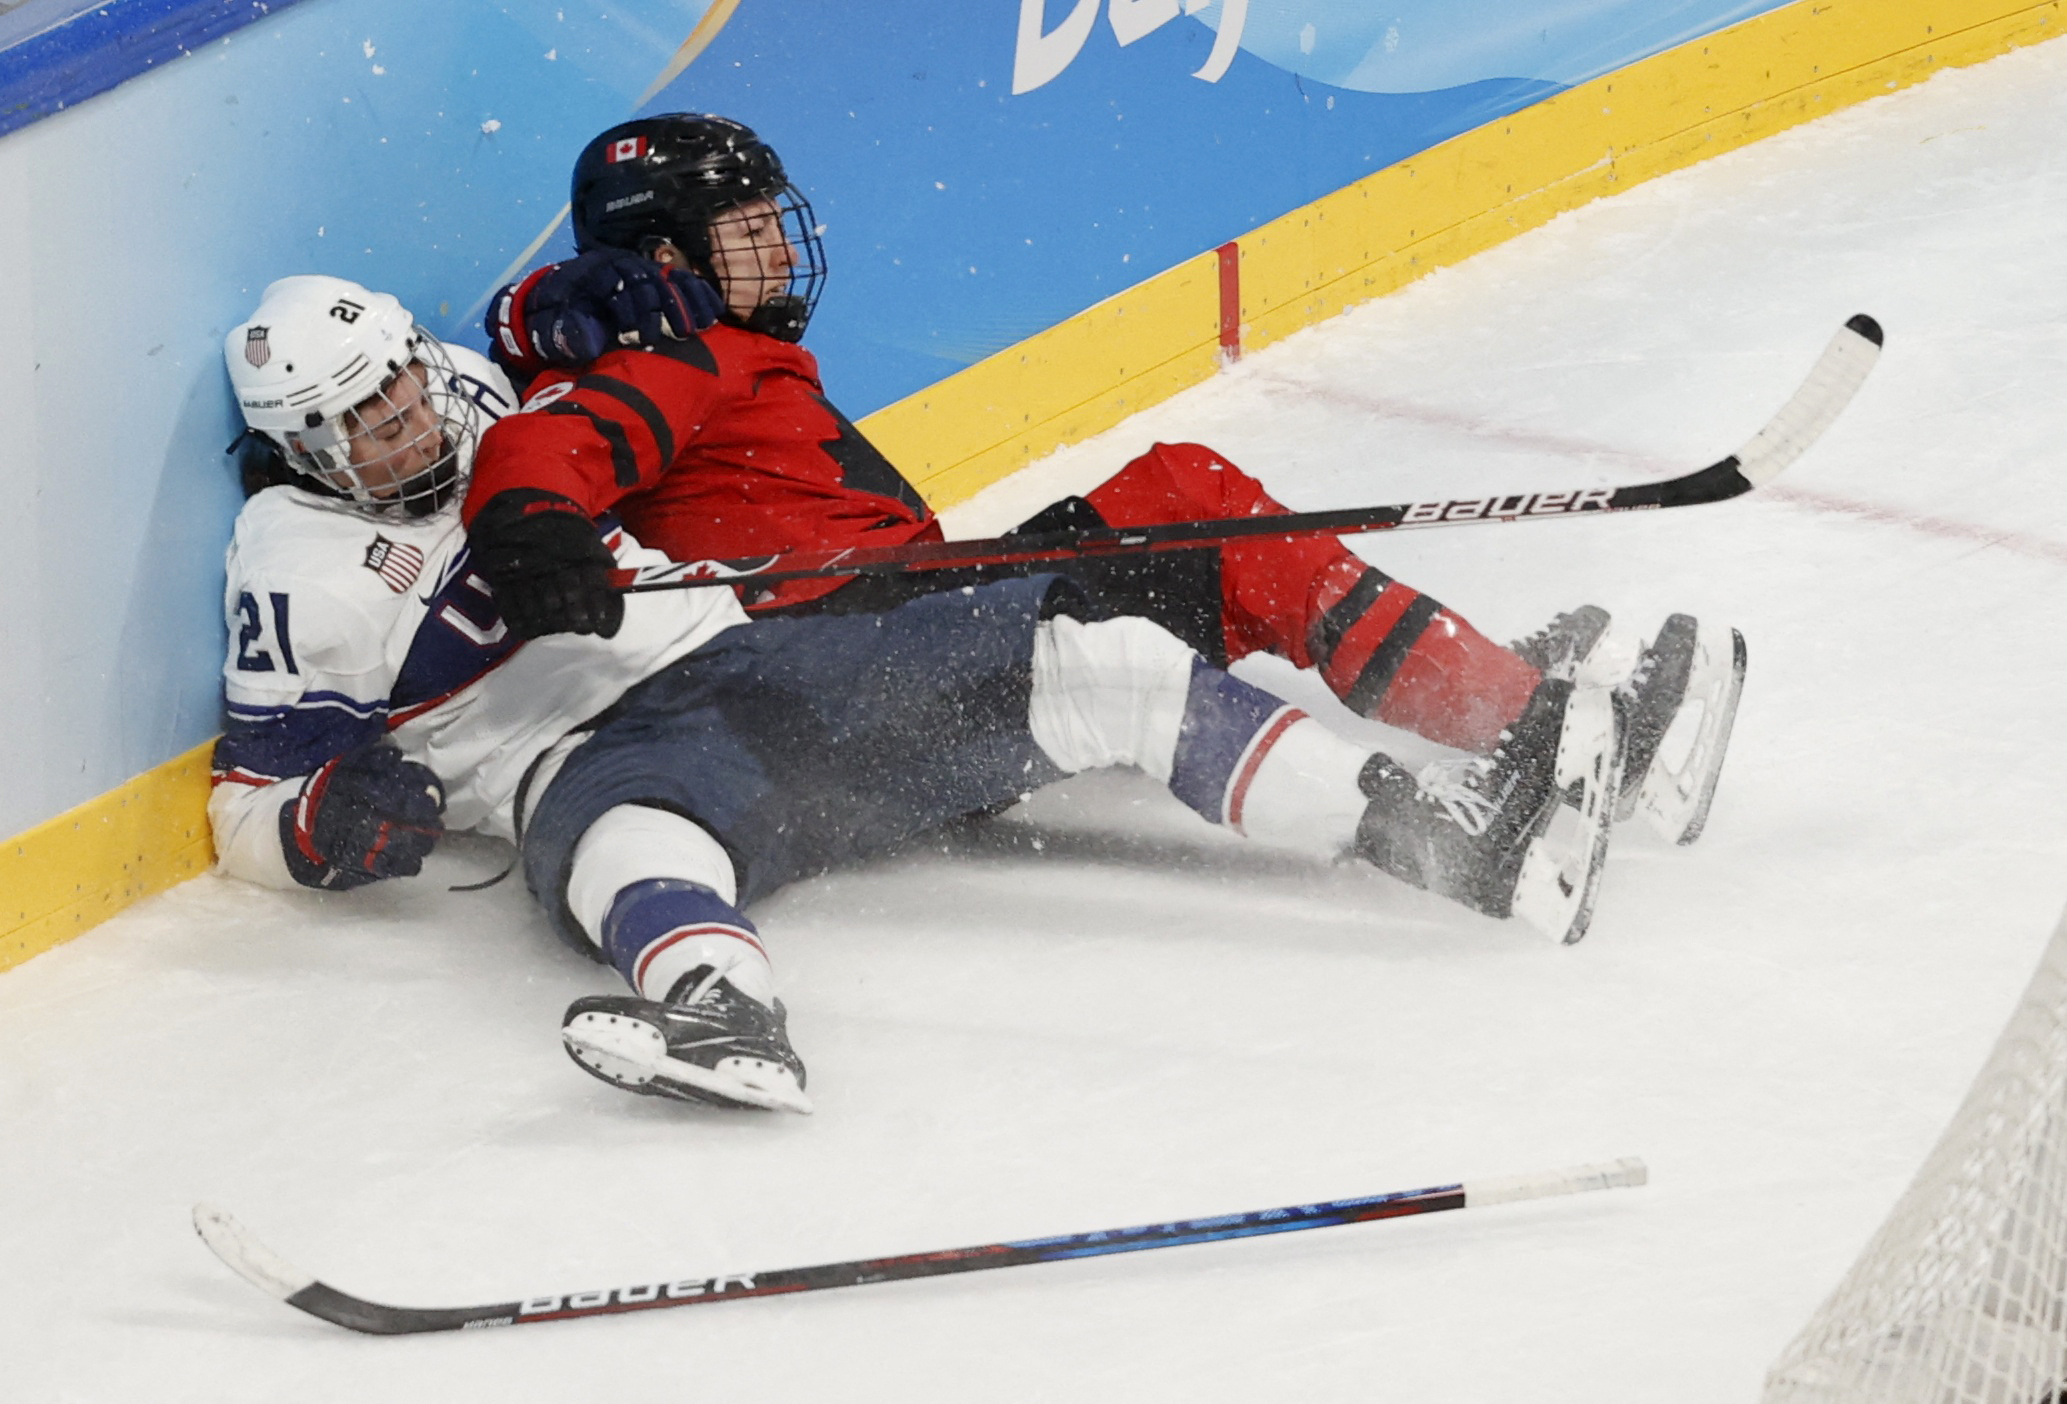 DAY #13 SPORTS FOCUS: Tough day at the office for U.S. athletes as women’s hockey team falters to Canada and Shiffrin stumbles in combined slalom